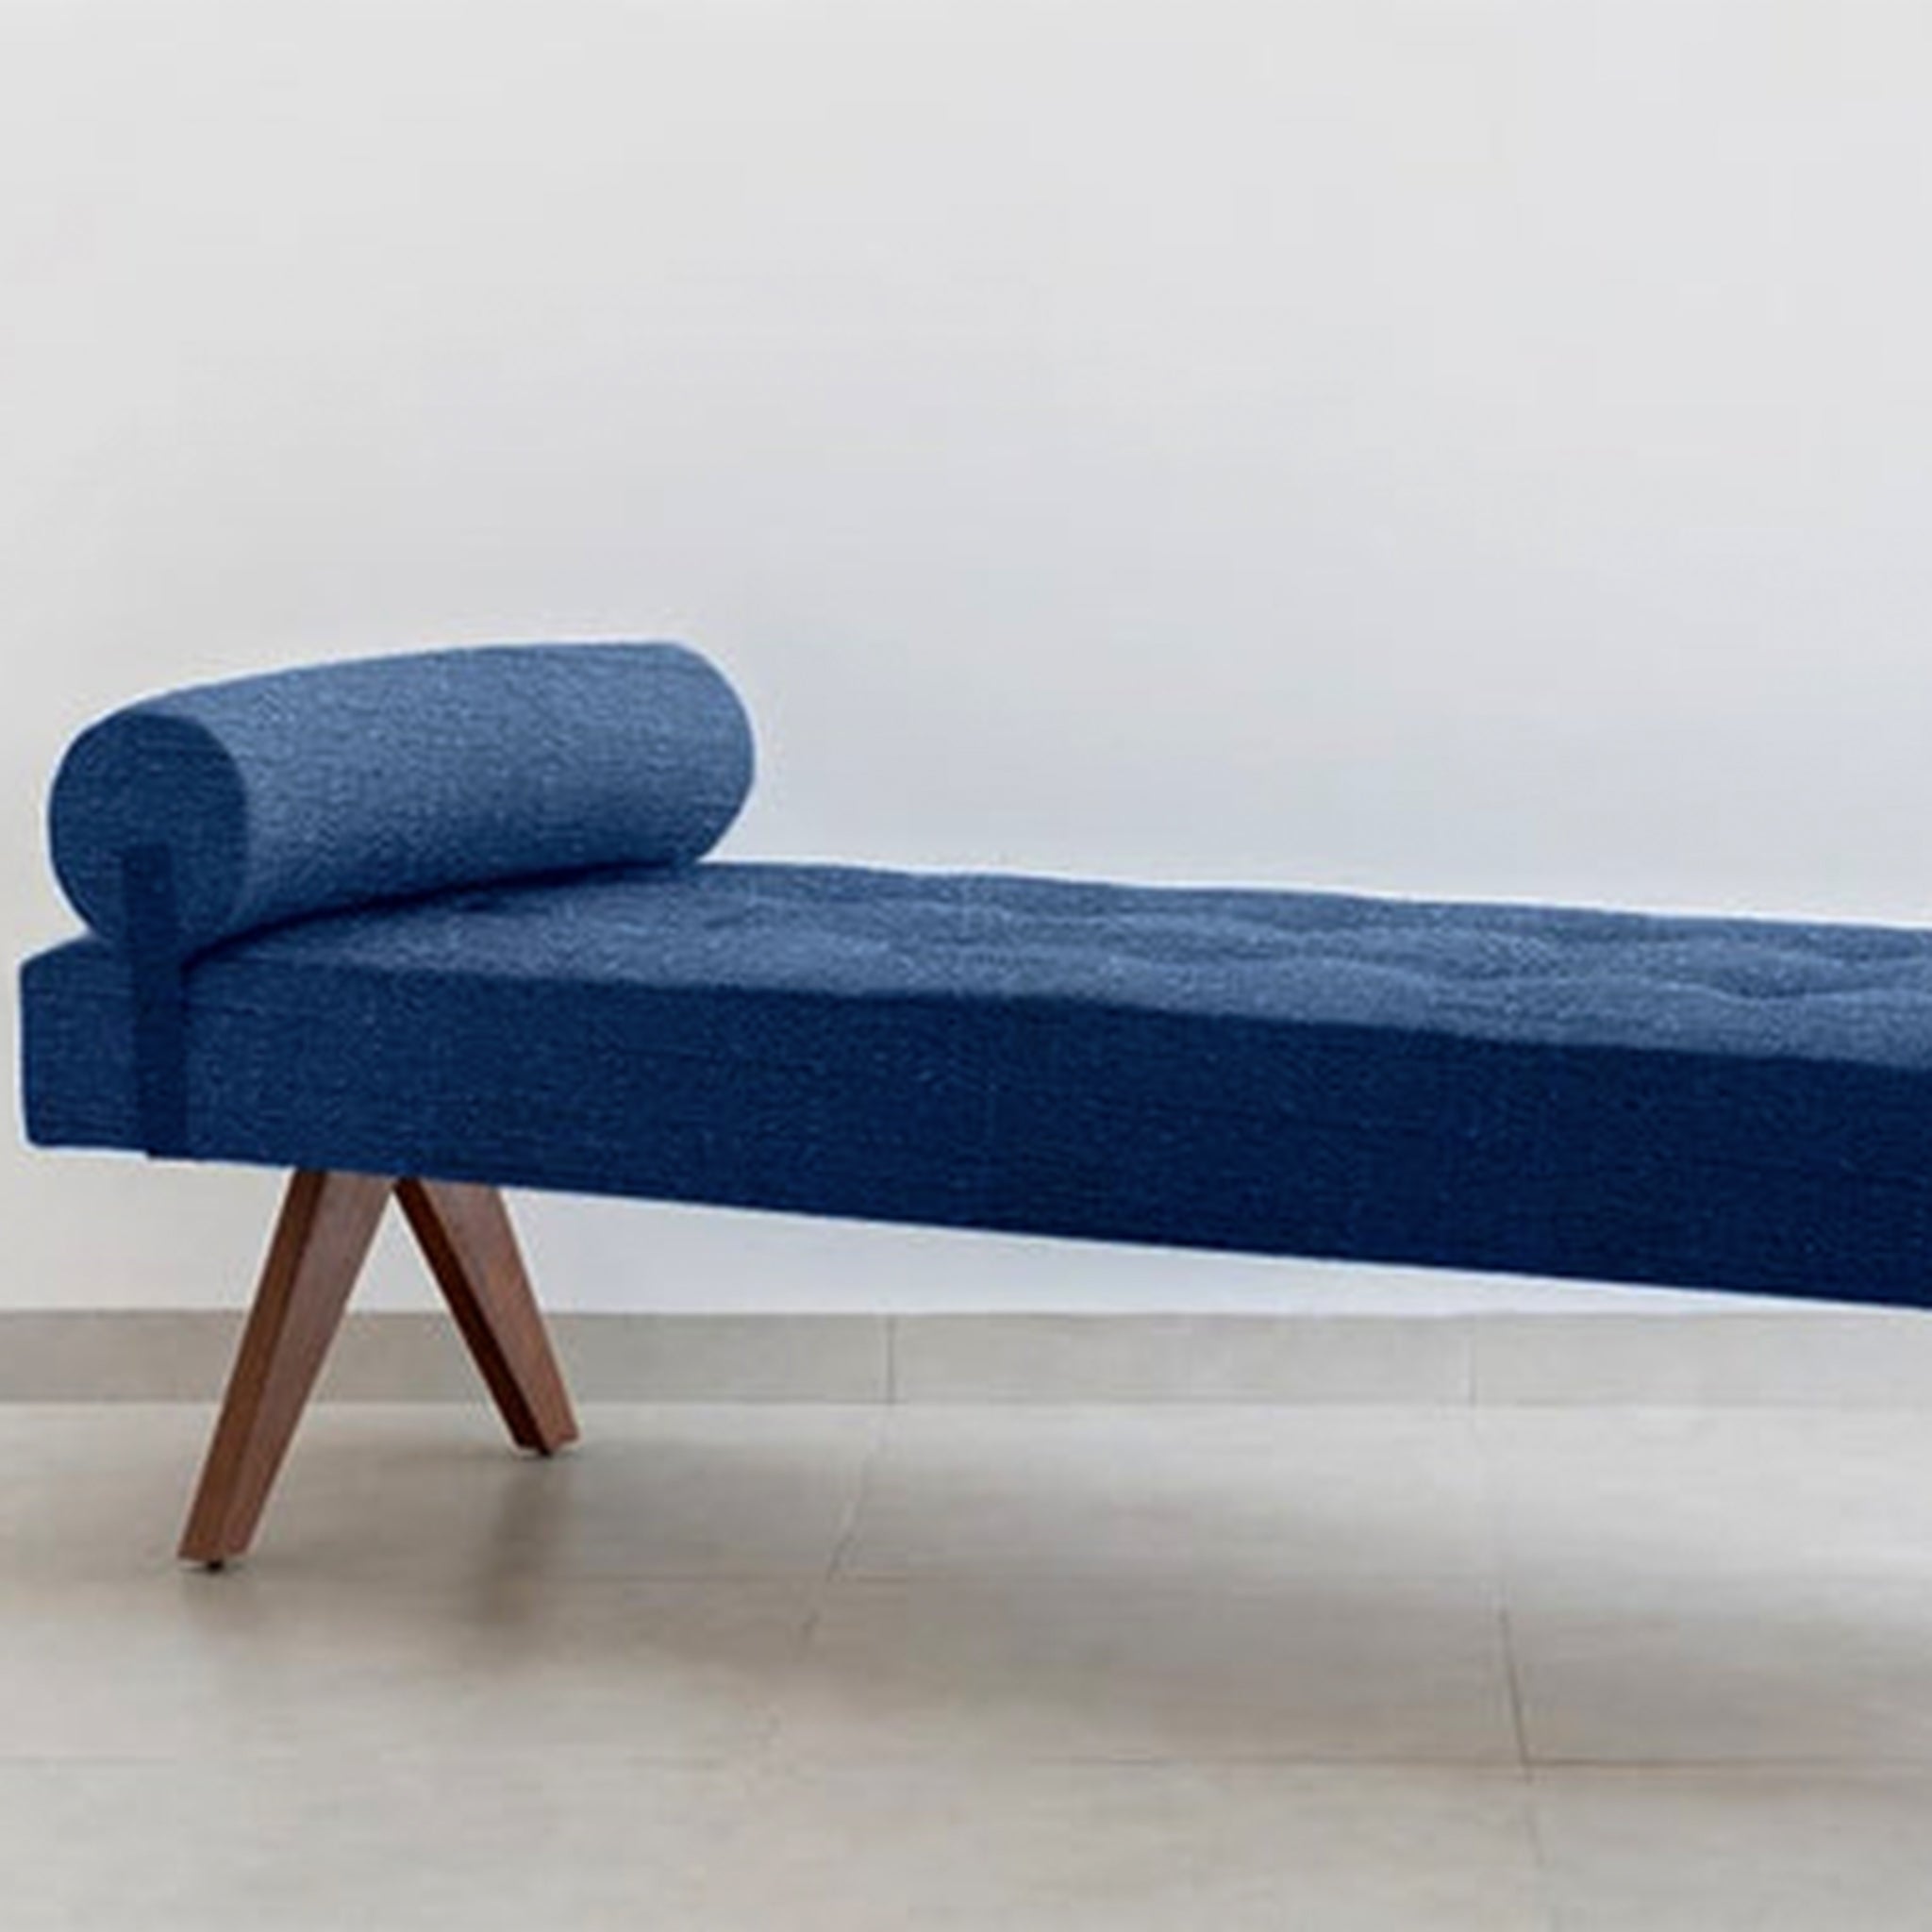 The Jack Daybed suitable for living rooms and bedrooms